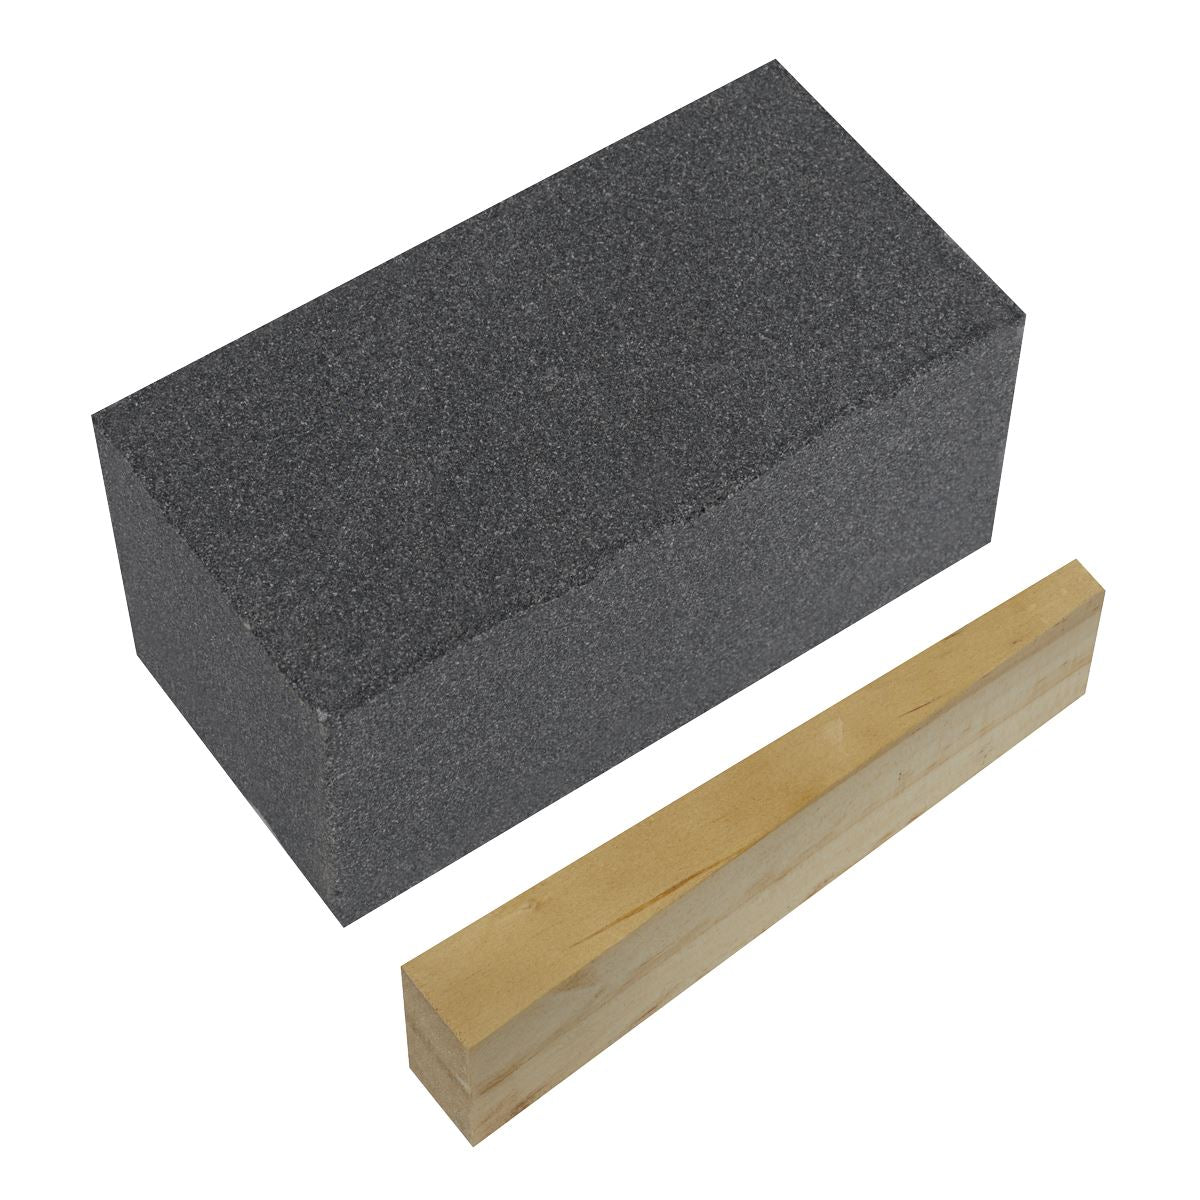 Worksafe by Sealey Floor Grinding Block 50 x 50 x 100mm 60Grit - Pack of 6